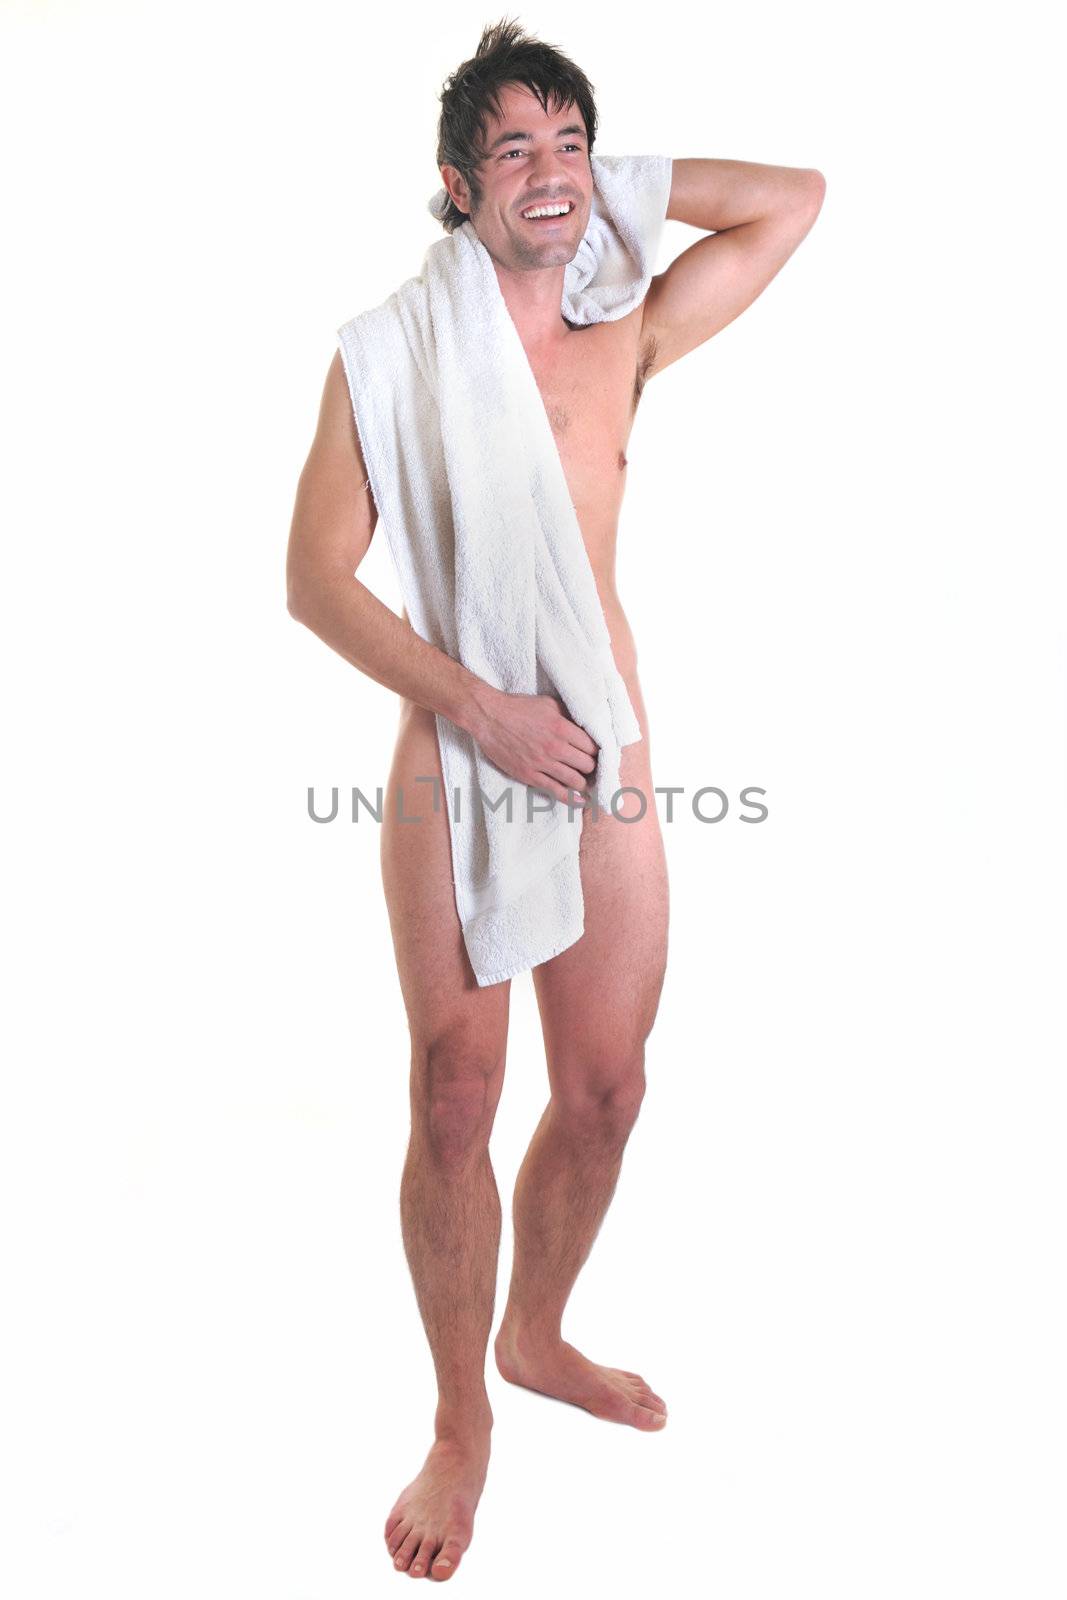 nude man with bath towel in front of white background